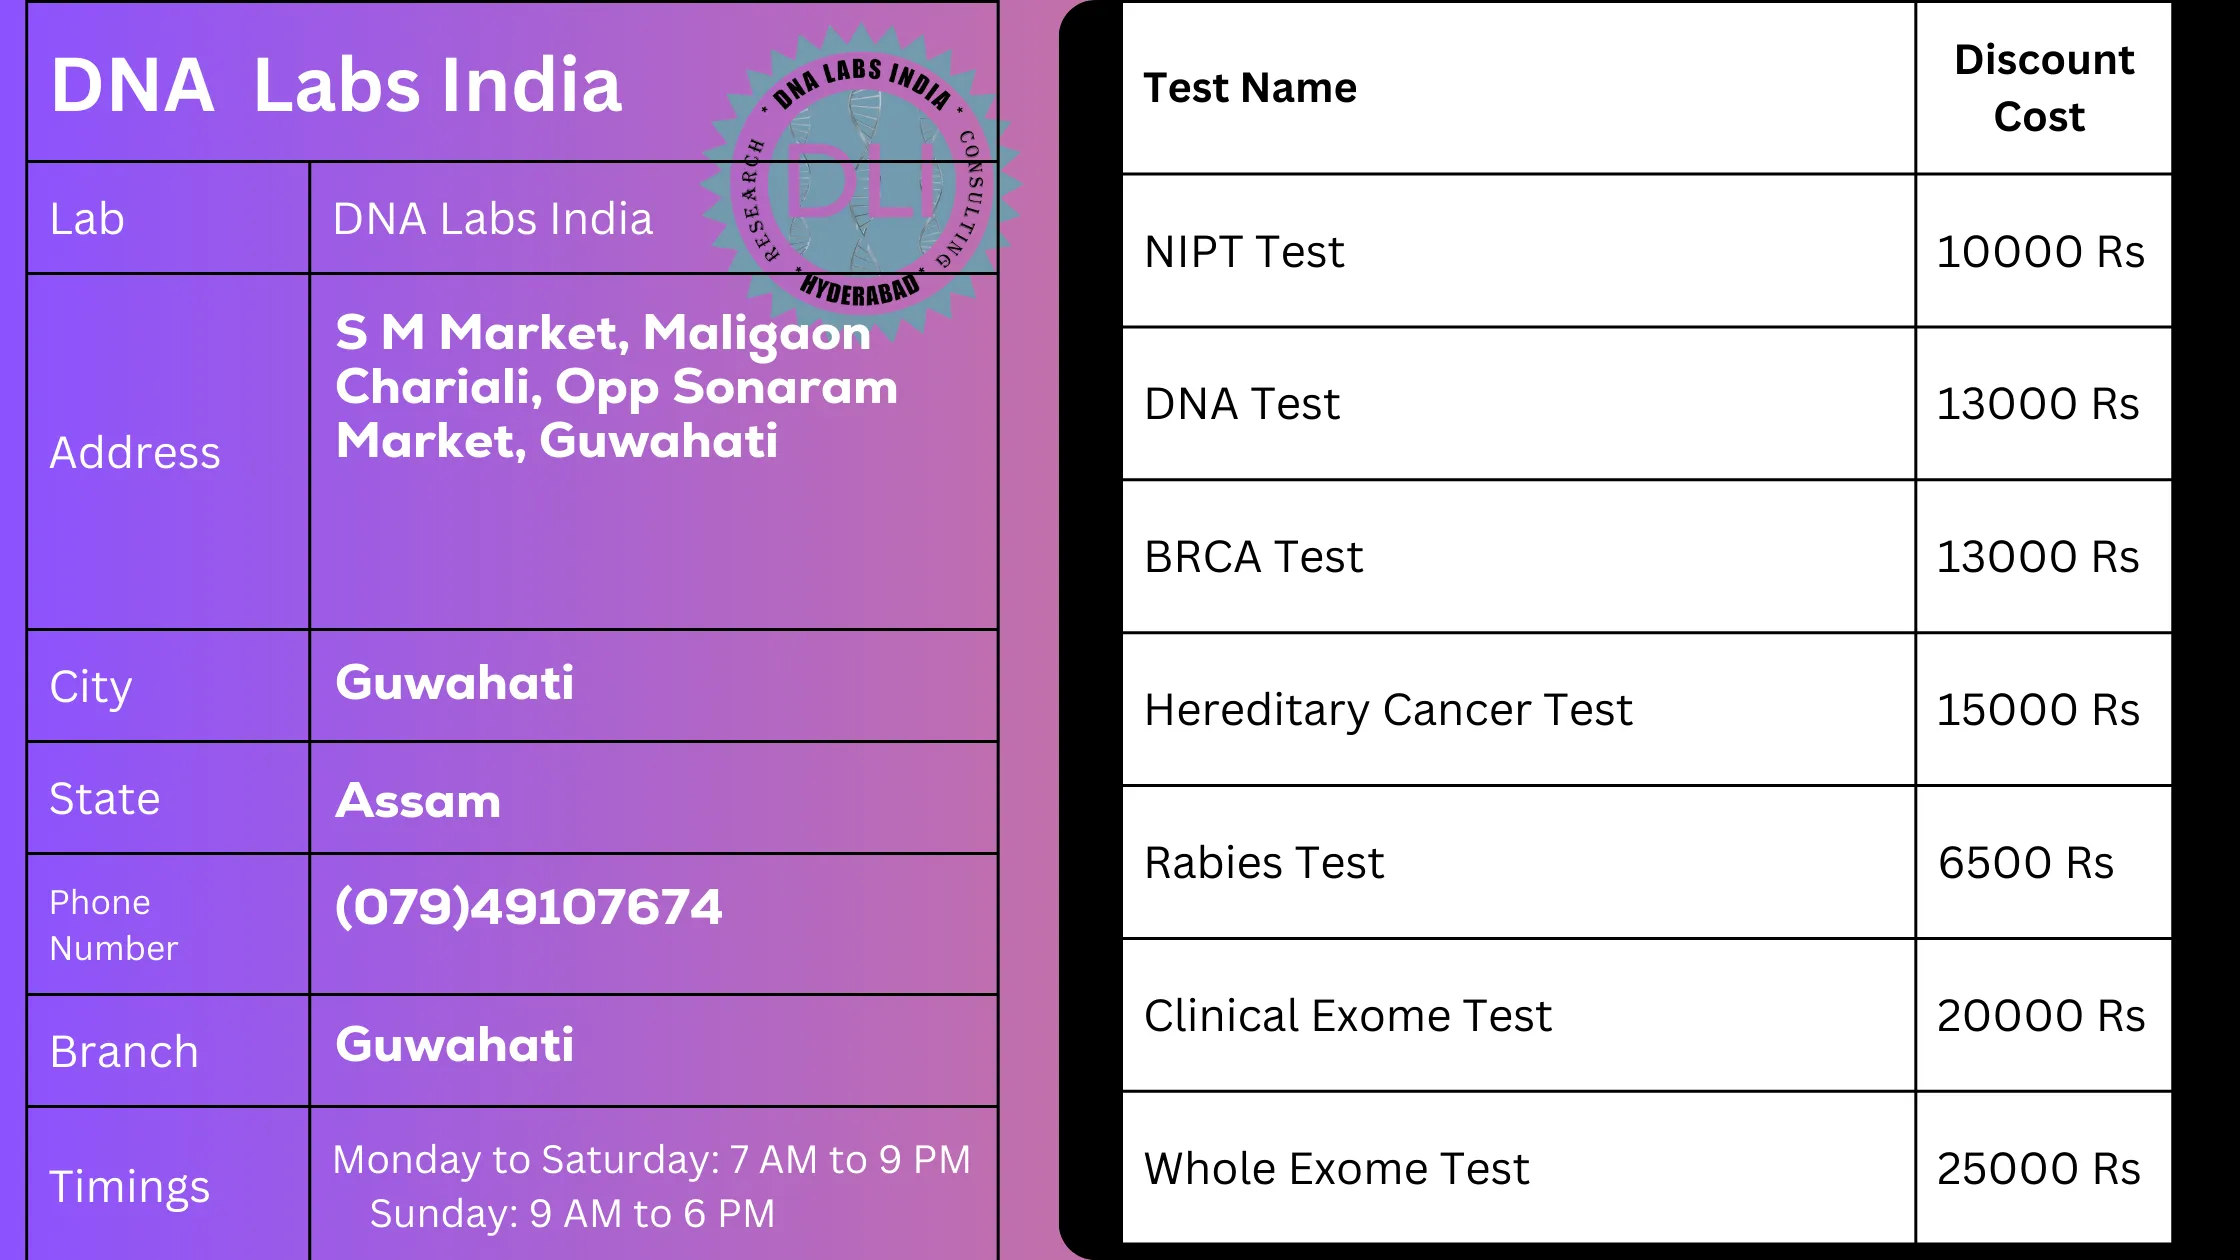 DNA Labs India: Guwahati - Your Trusted DNA Testing Partner